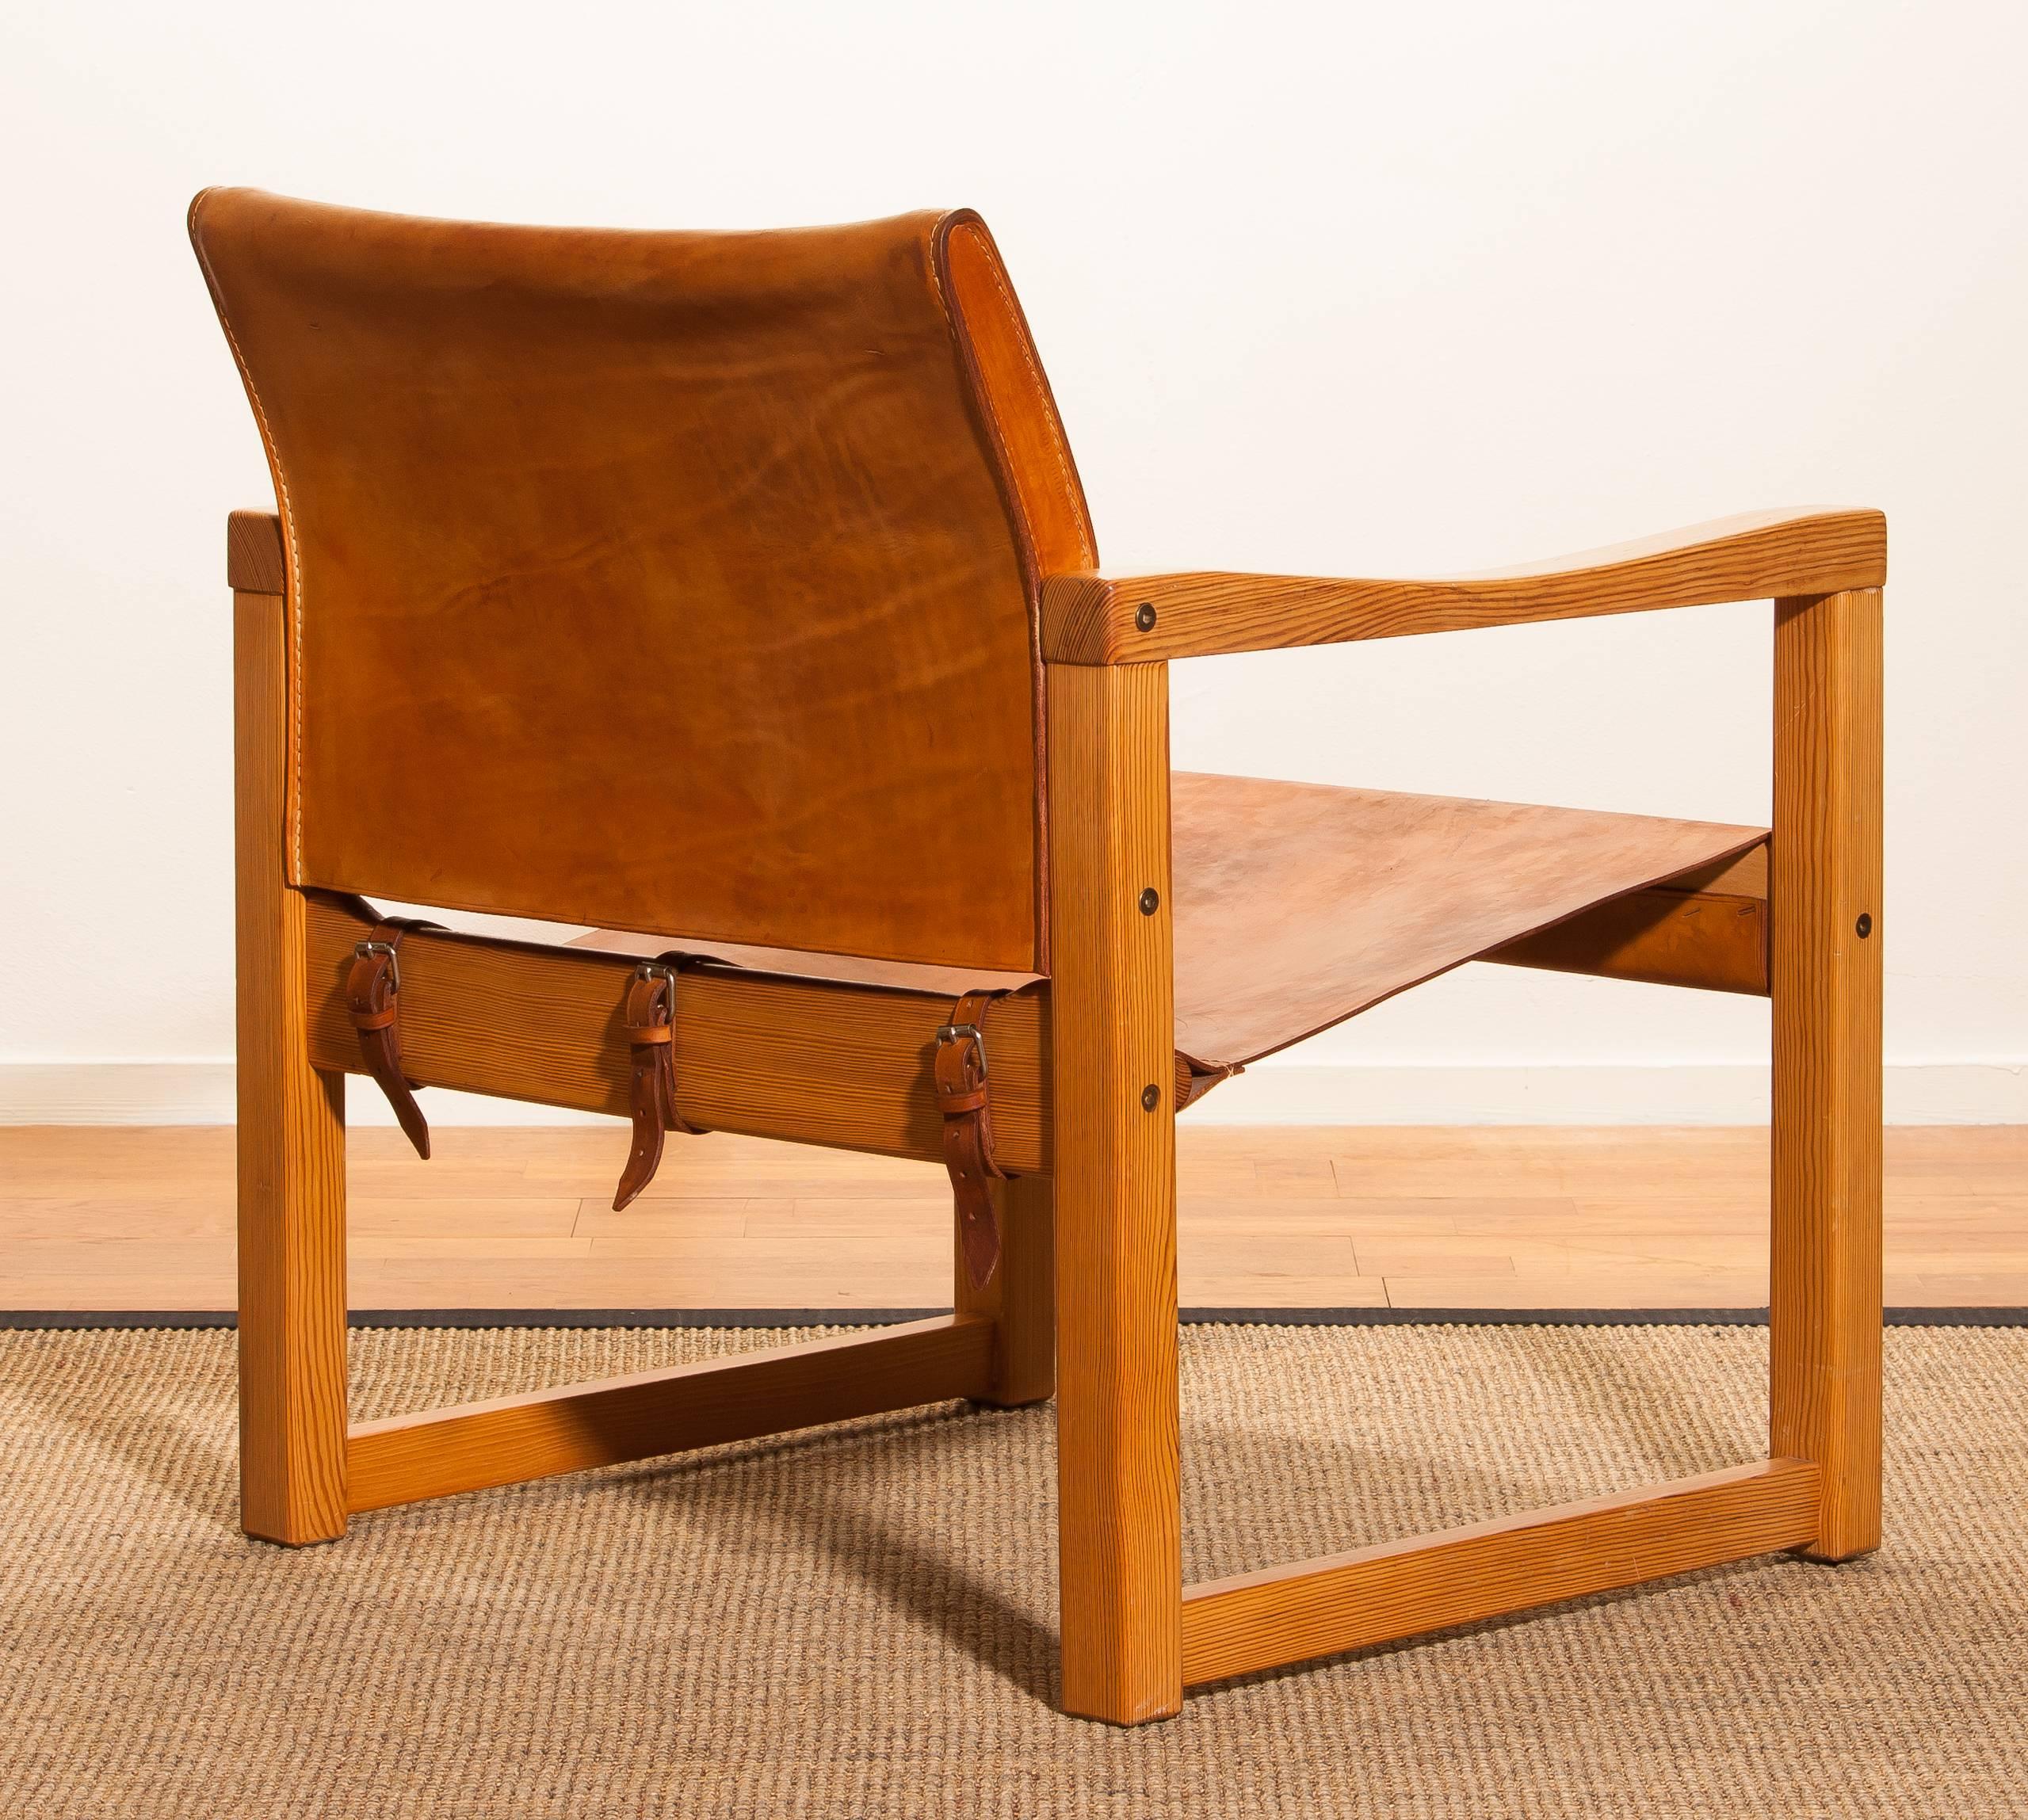 This elegant leather “Safari” chair designed by the Swedish designer Karin Mobring and produced in the 1970s. The chairs frame is made of pine. The seating / backrest and belts are made of very thick and sturdy cognac leather and in very good